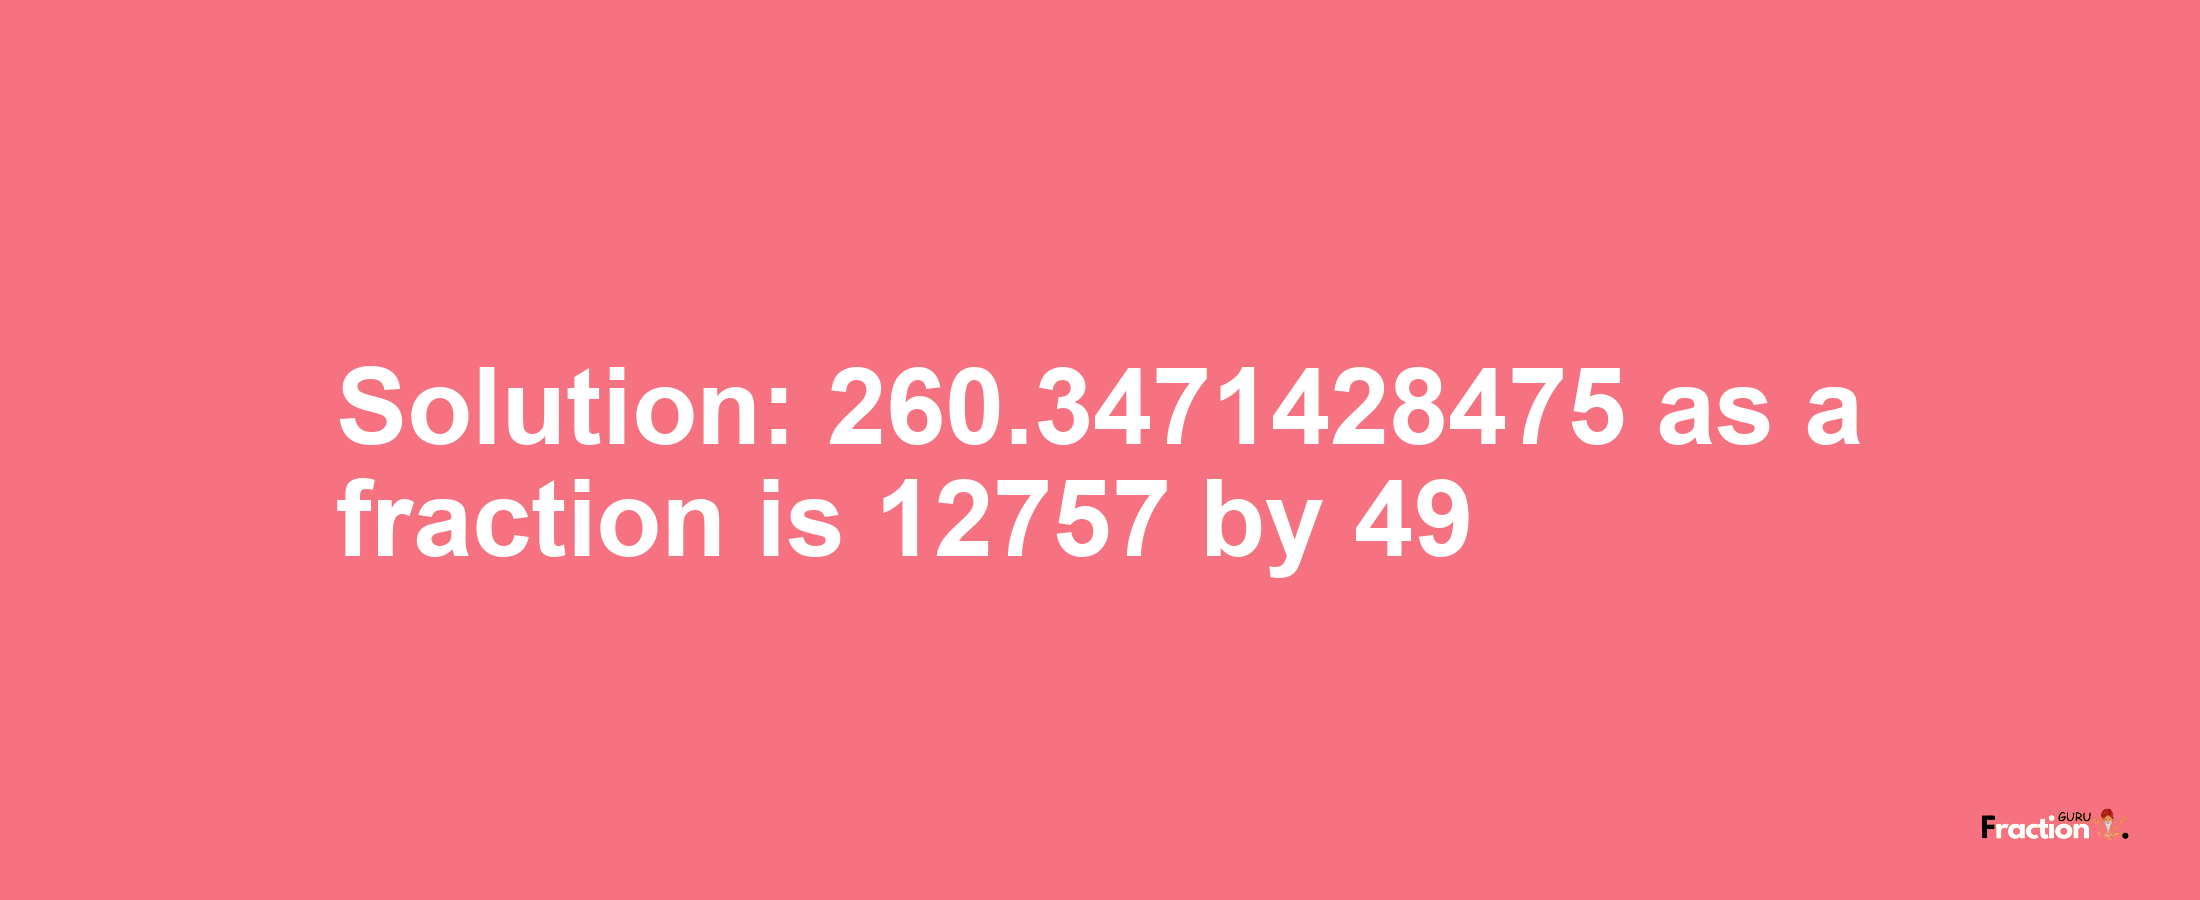 Solution:260.3471428475 as a fraction is 12757/49